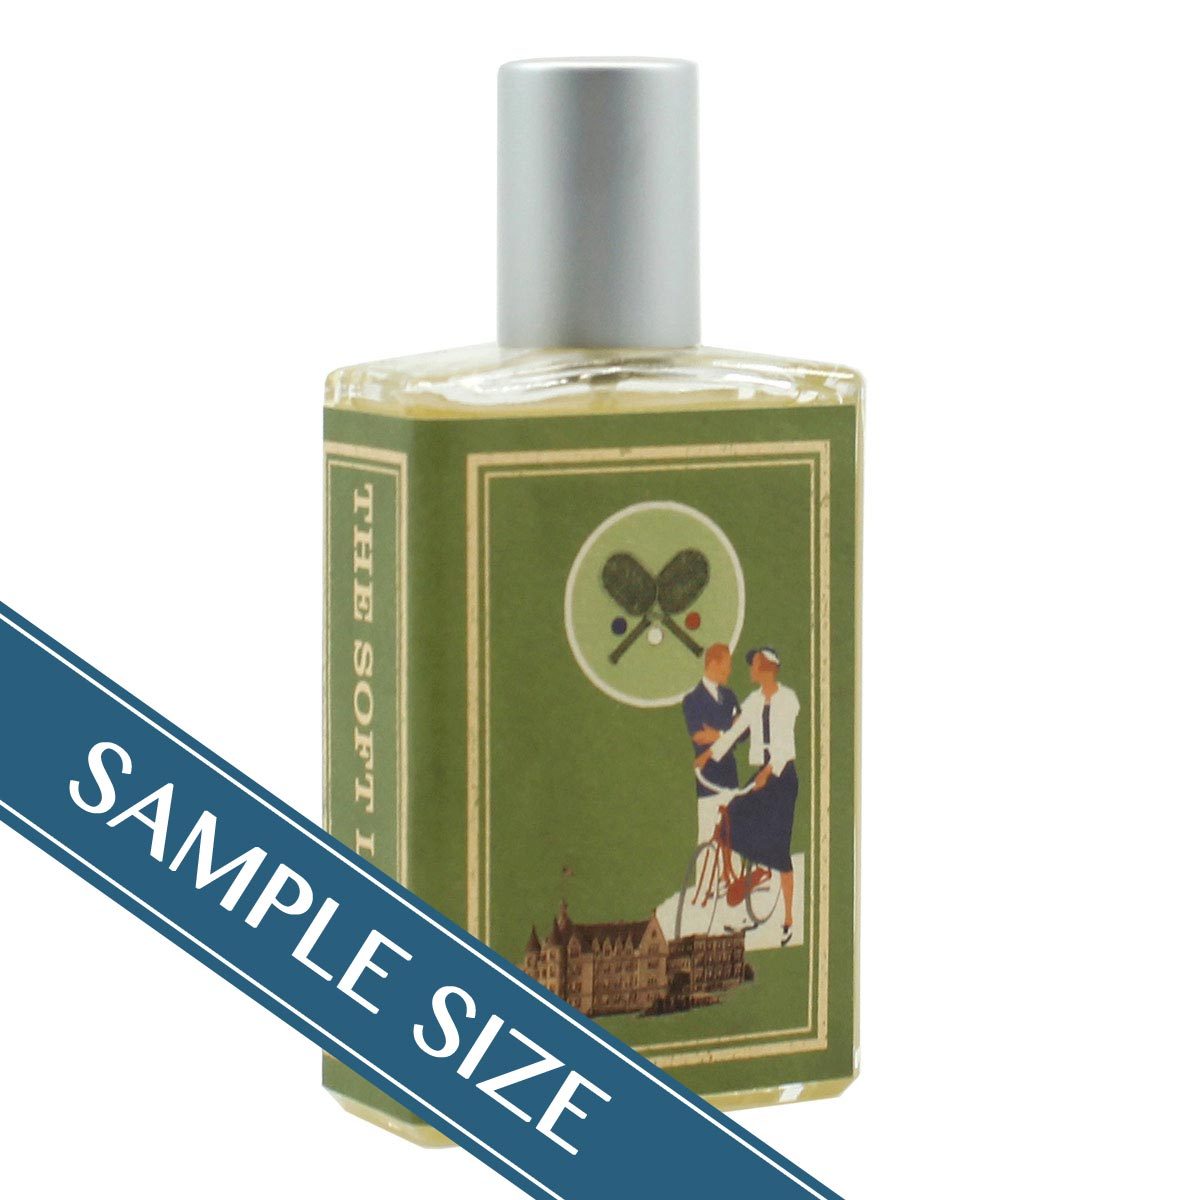 Primary image of Sample - The Soft Lawn EDP